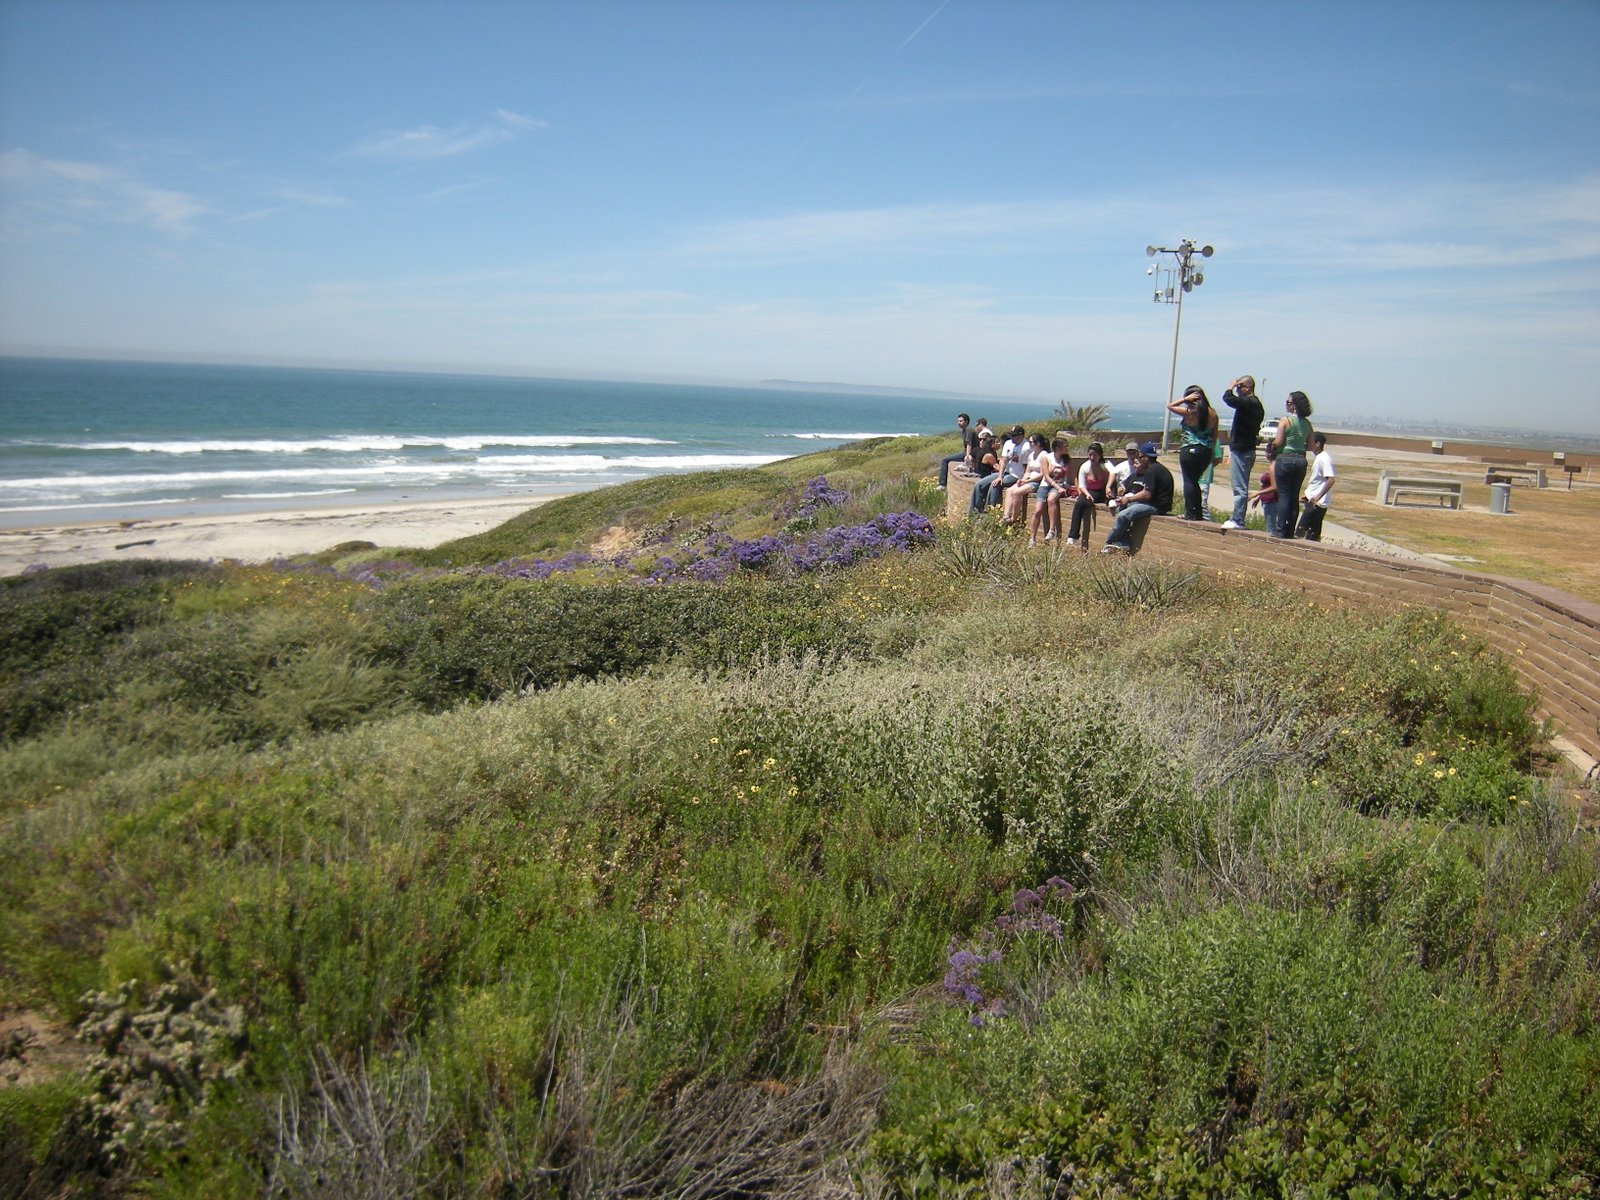 >Help Stop the Closure of California State Parks